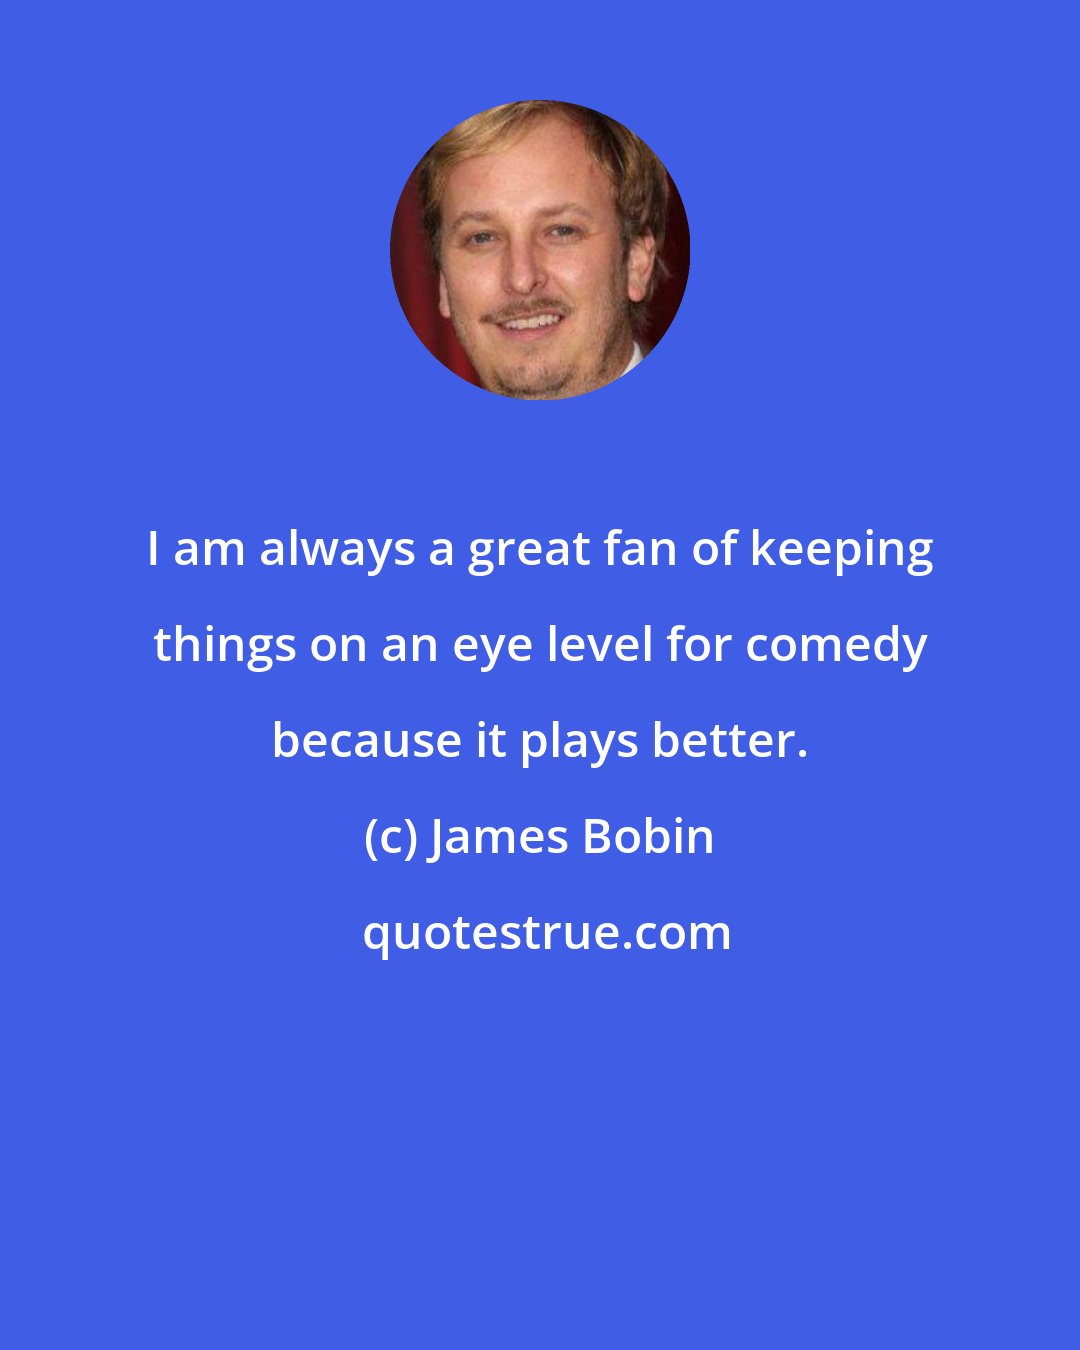 James Bobin: I am always a great fan of keeping things on an eye level for comedy because it plays better.